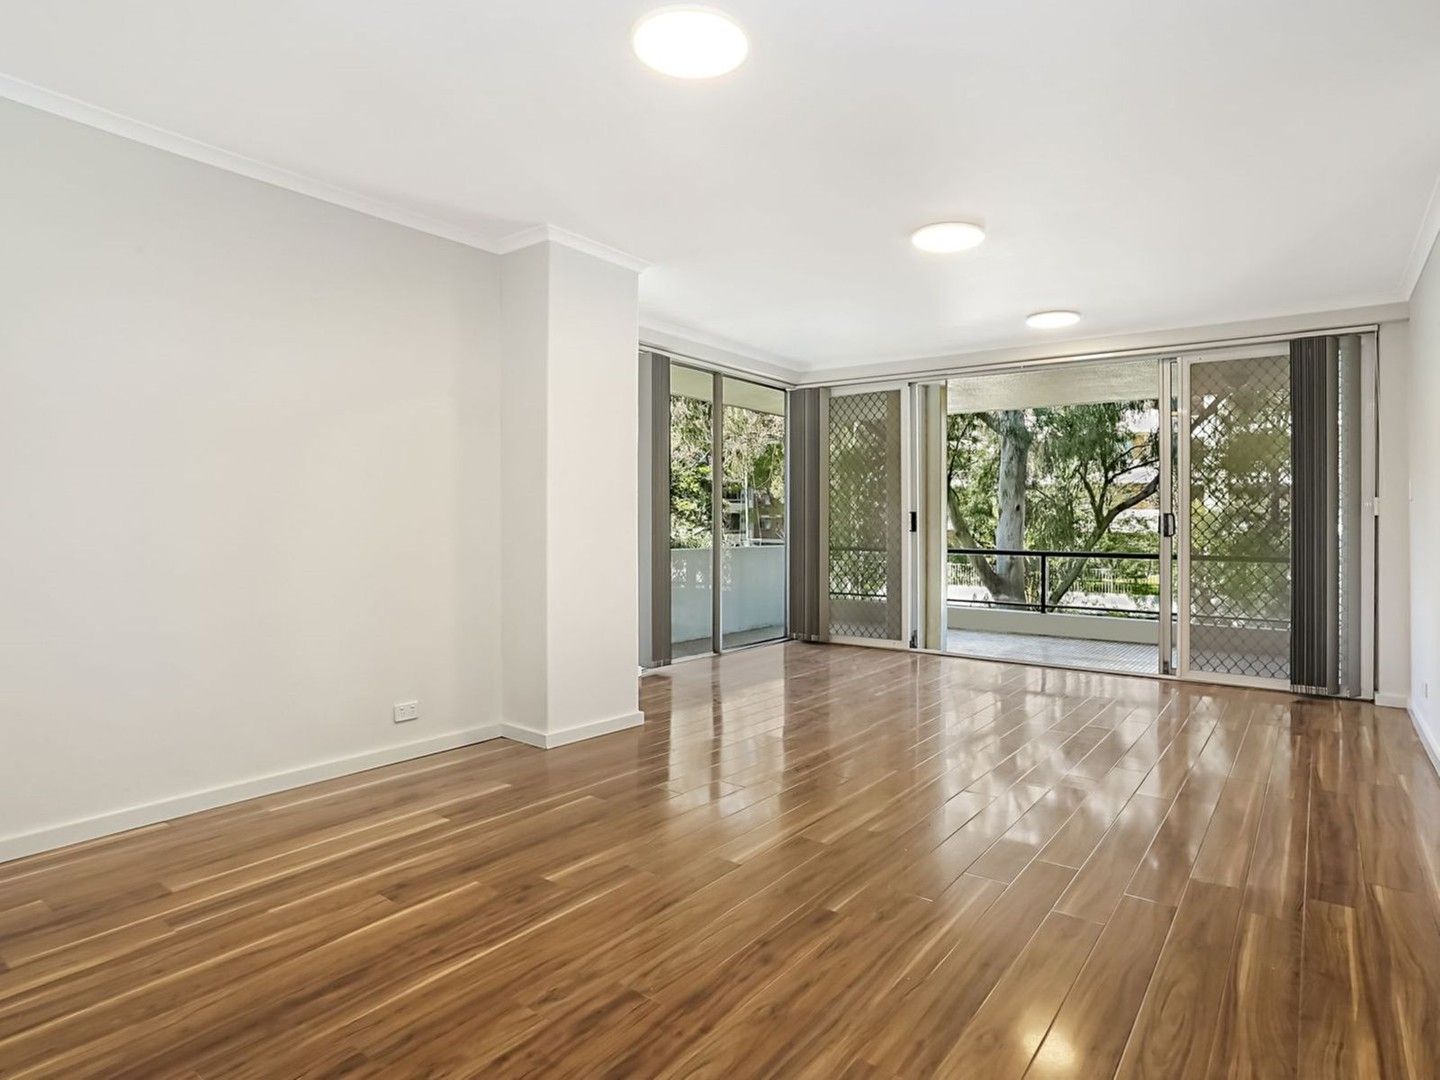 2 bedrooms Apartment / Unit / Flat in 25/2 Parkside Lane CHATSWOOD NSW, 2067